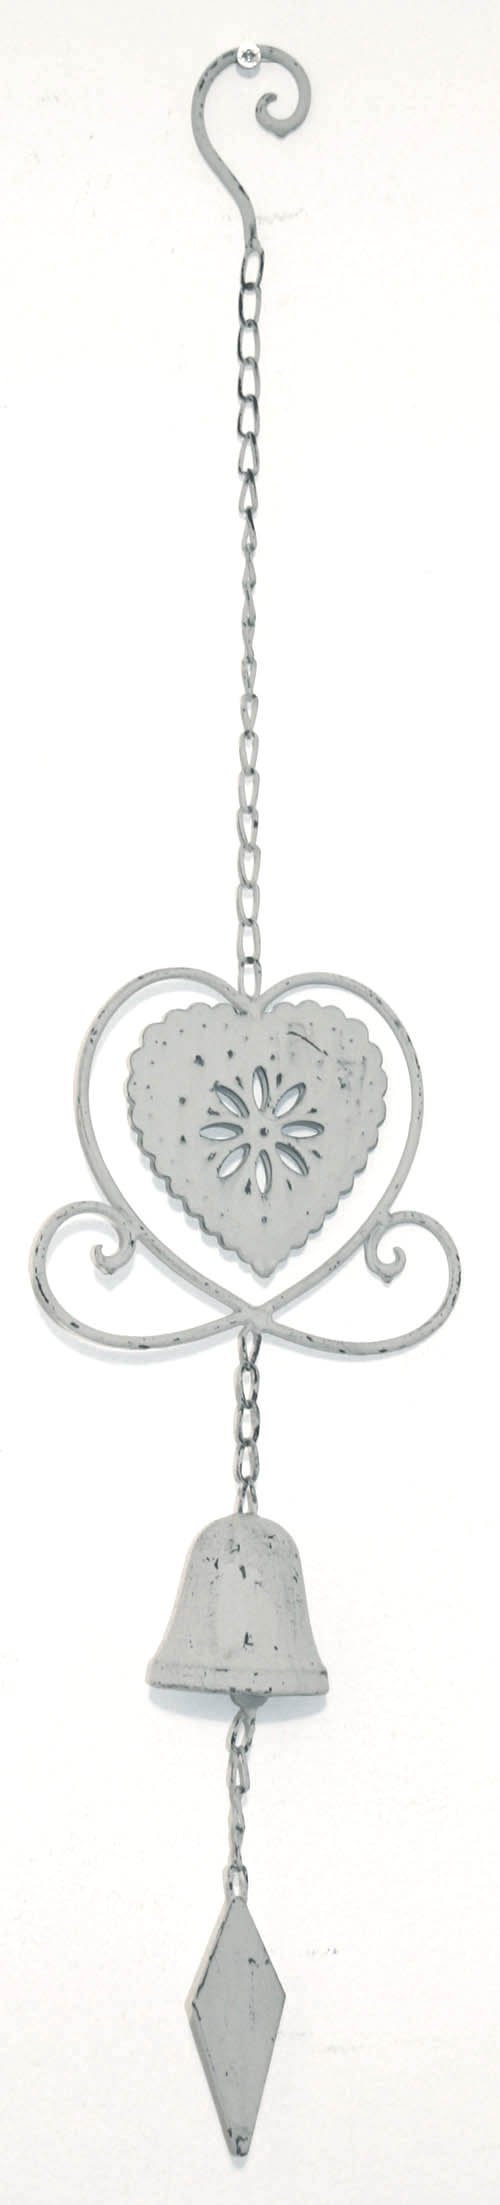 grey-heart-hanging-decorative-bell